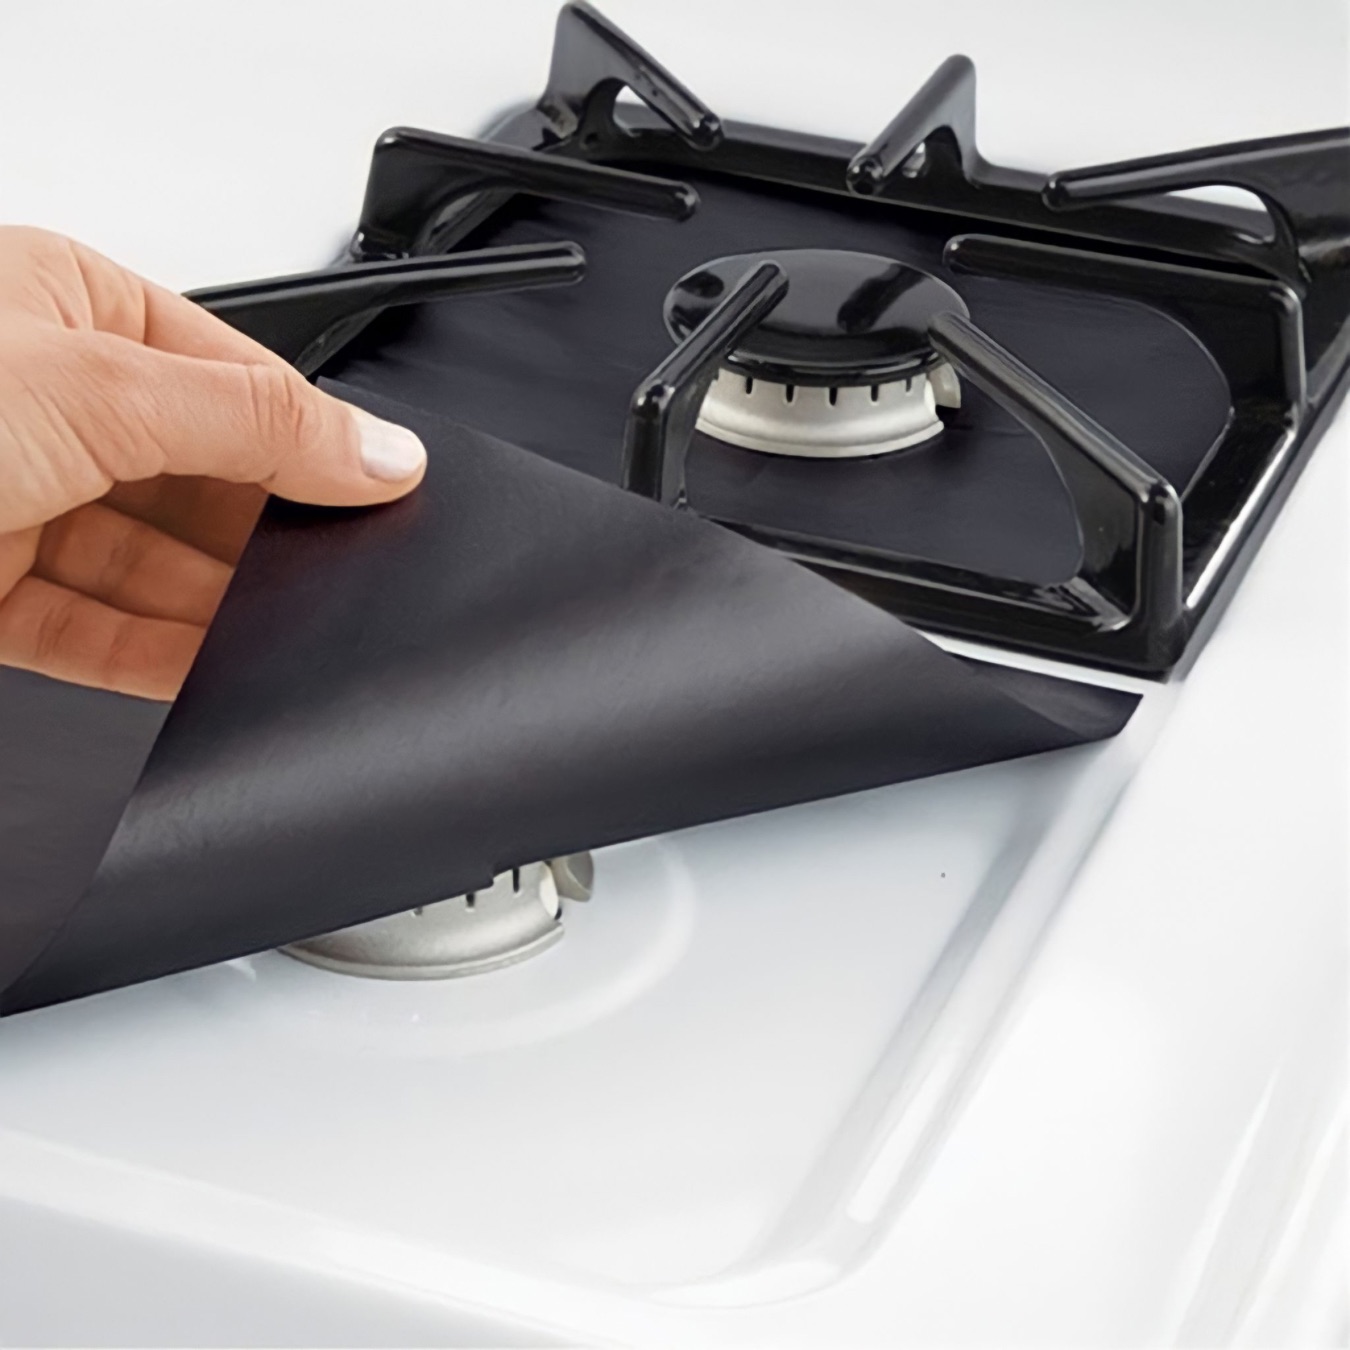 How To Protect Gas Stove Top From Spills